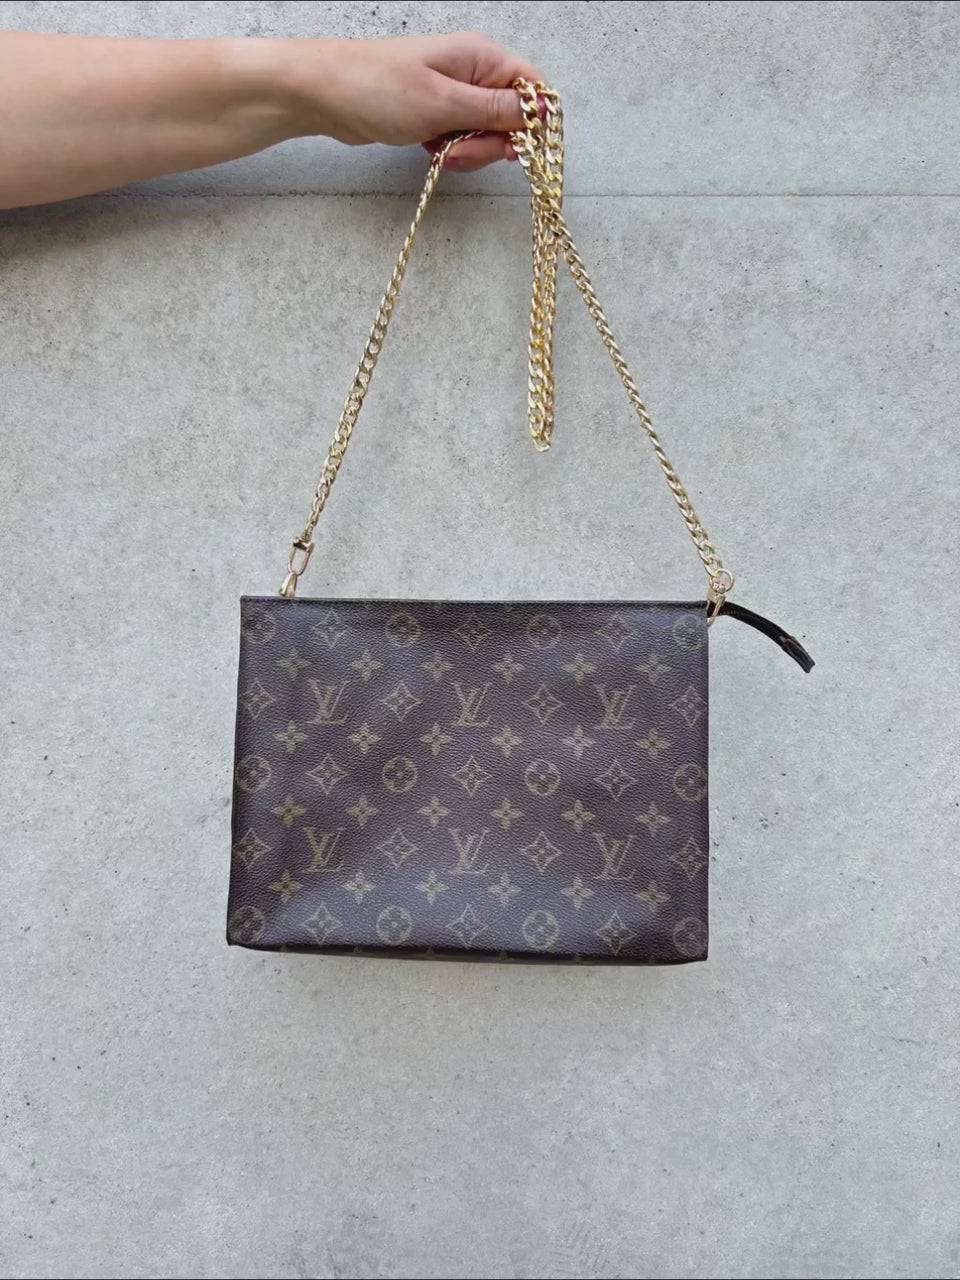 Louis Vuitton Toiletry 26 vs. the New Toiletry with Chain 